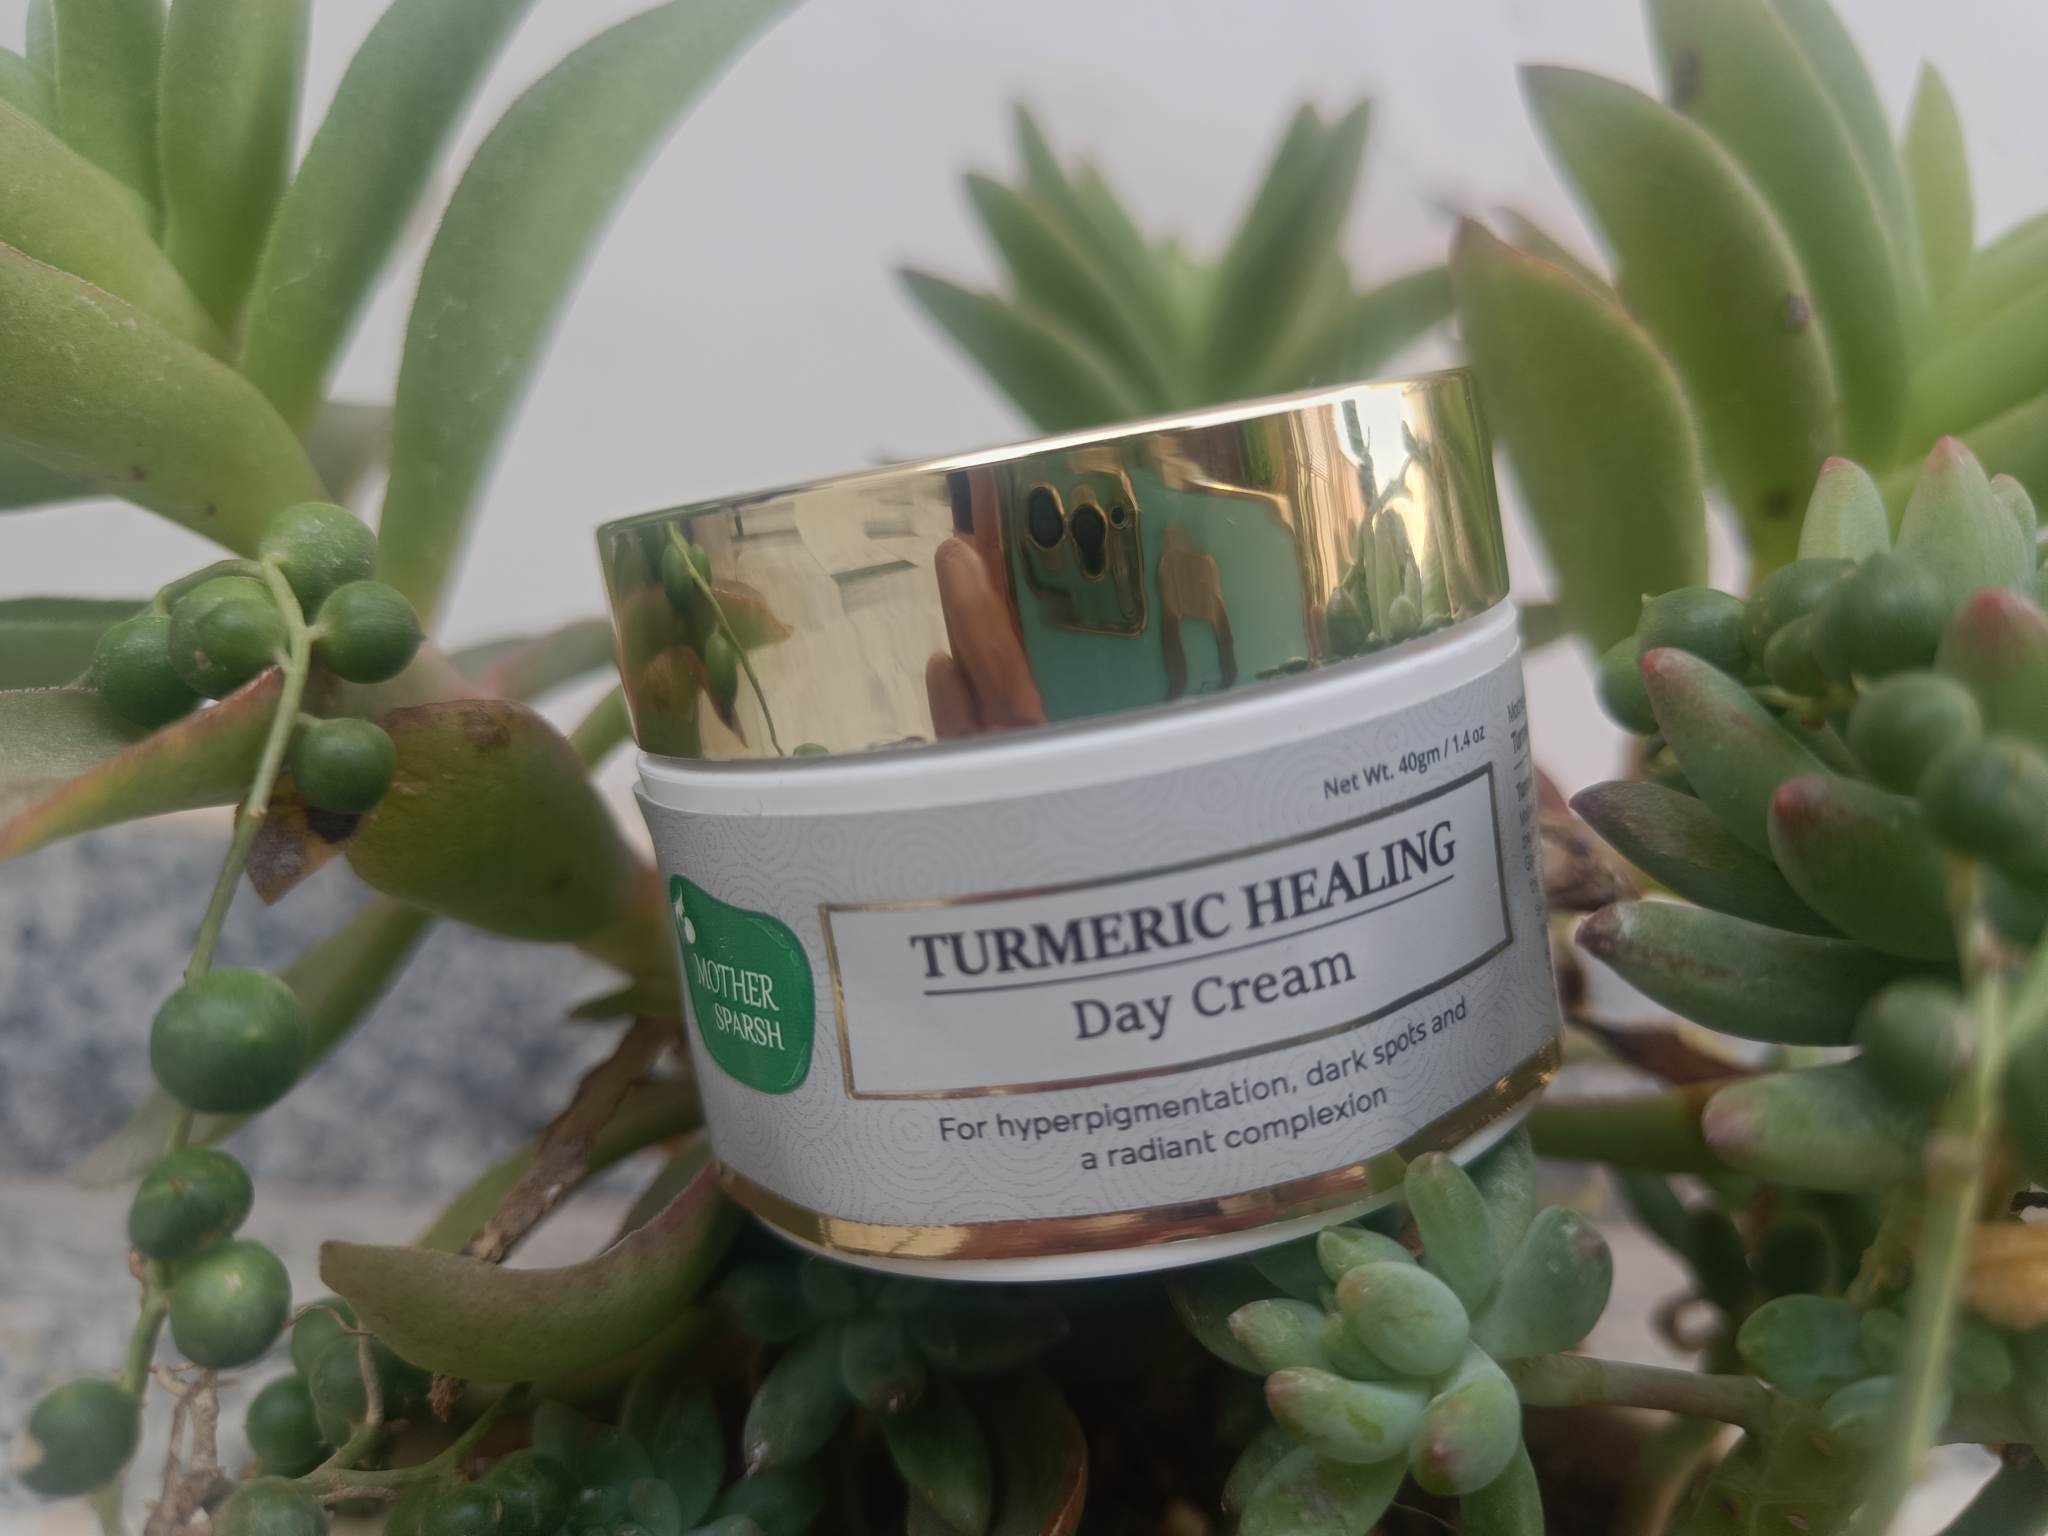 Mother Sparsh Turmeric Healing Day Cream| Review